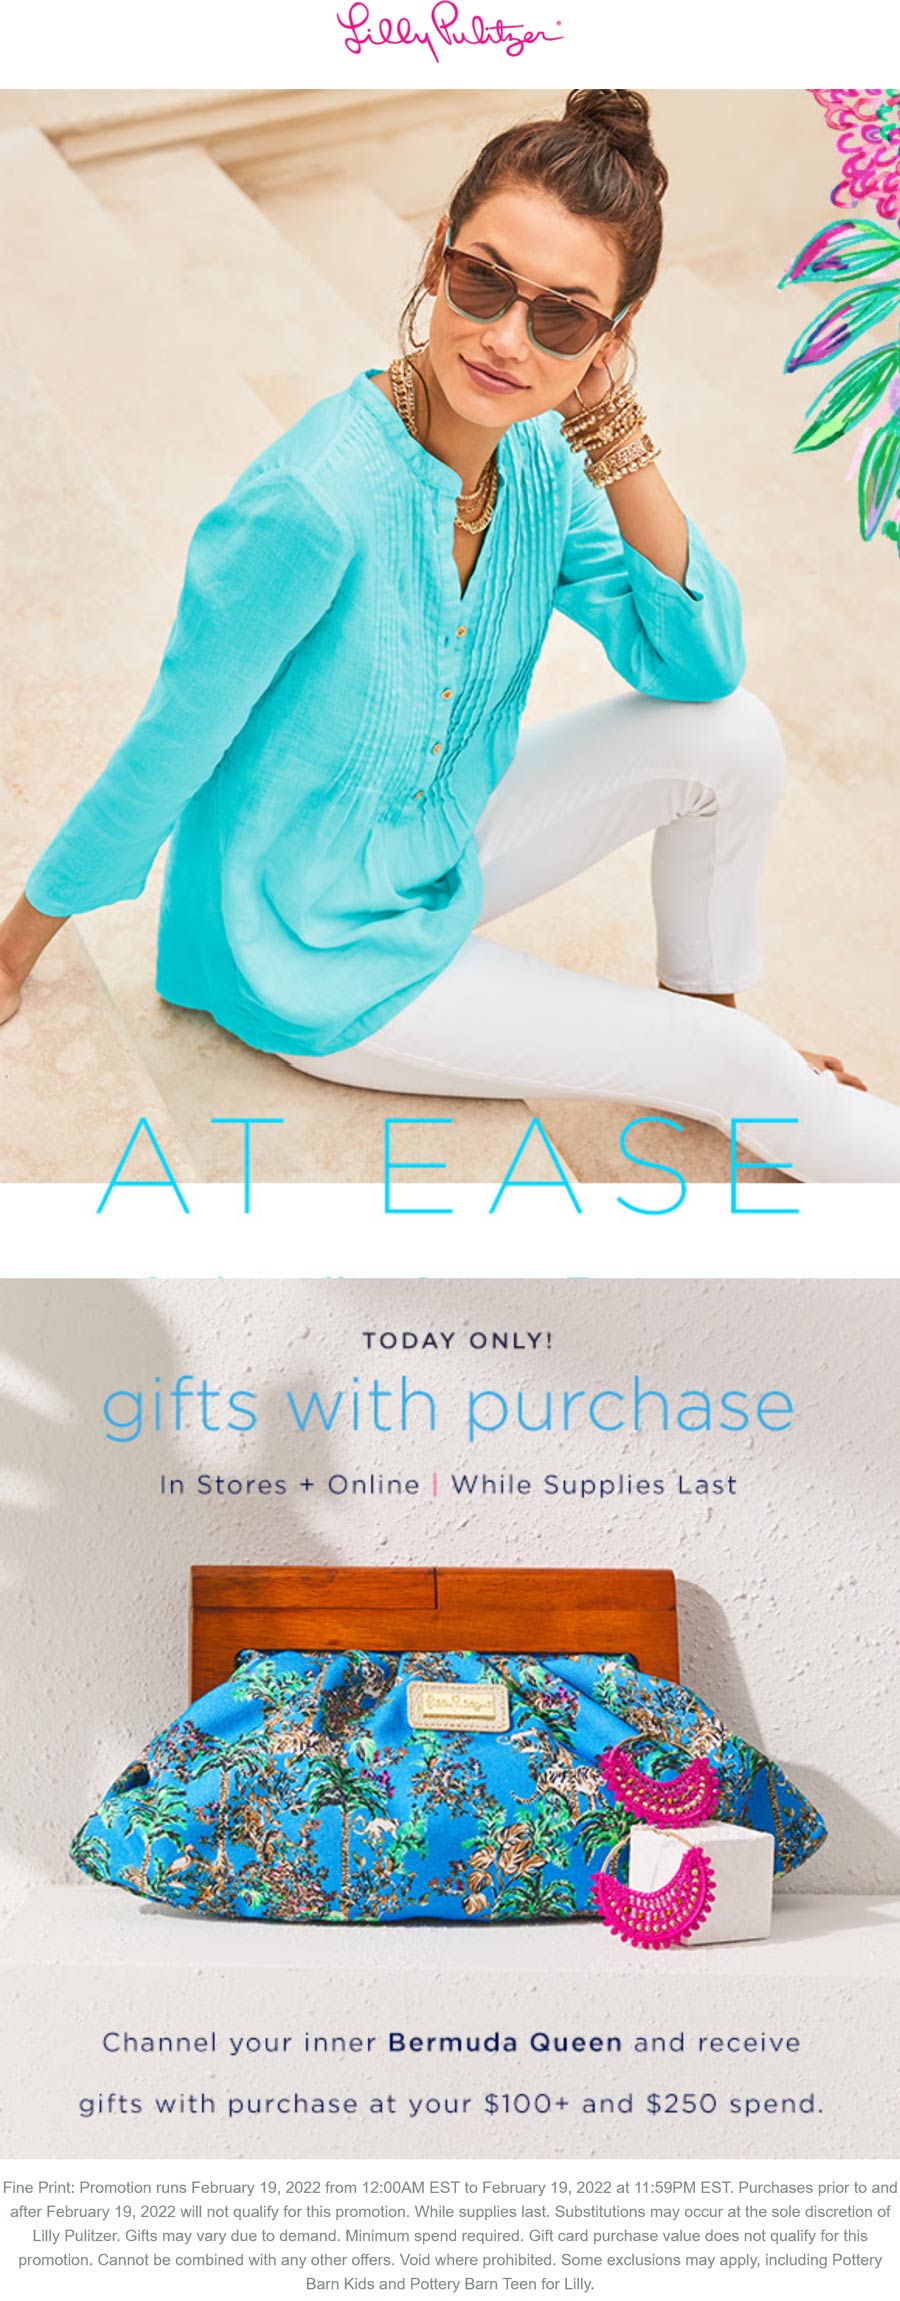 Lilly Pulitzer stores Coupon  Free gifts today with $100+ spent at Lilly Pulitzer, ditto online #lillypulitzer 